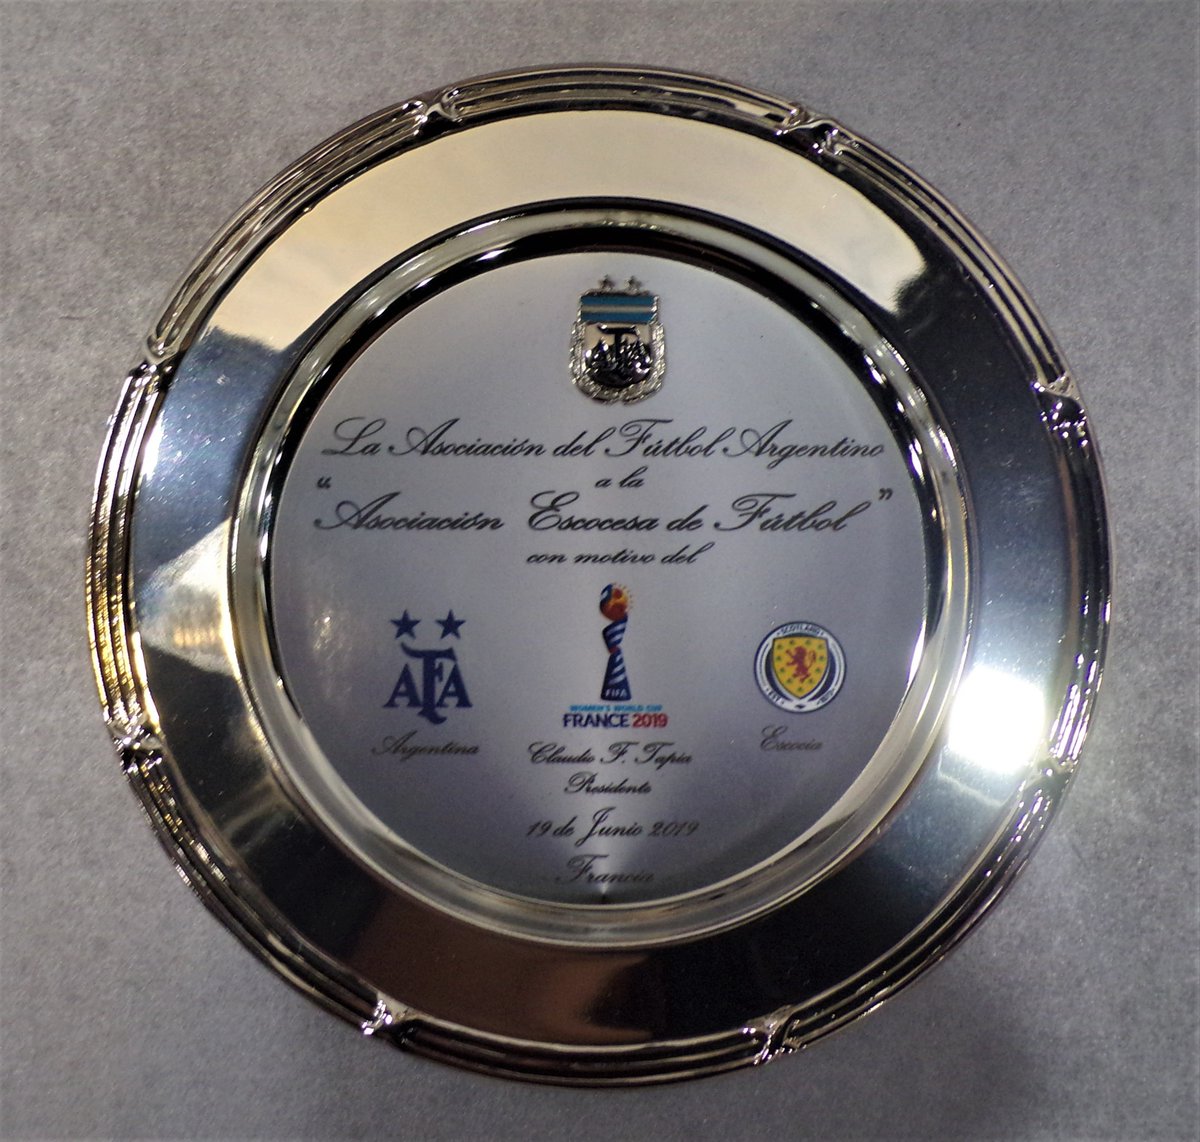 This decorative plate was presented to the Scotland Women's National football team #OnThisDay in 2019 as part of the 2019 FIFA Women's World Cup. The plate is engraved in Spanish and commemorates the Argentina - Scotland game with crests of both countries represented. https://t.co/LJ985OEfch